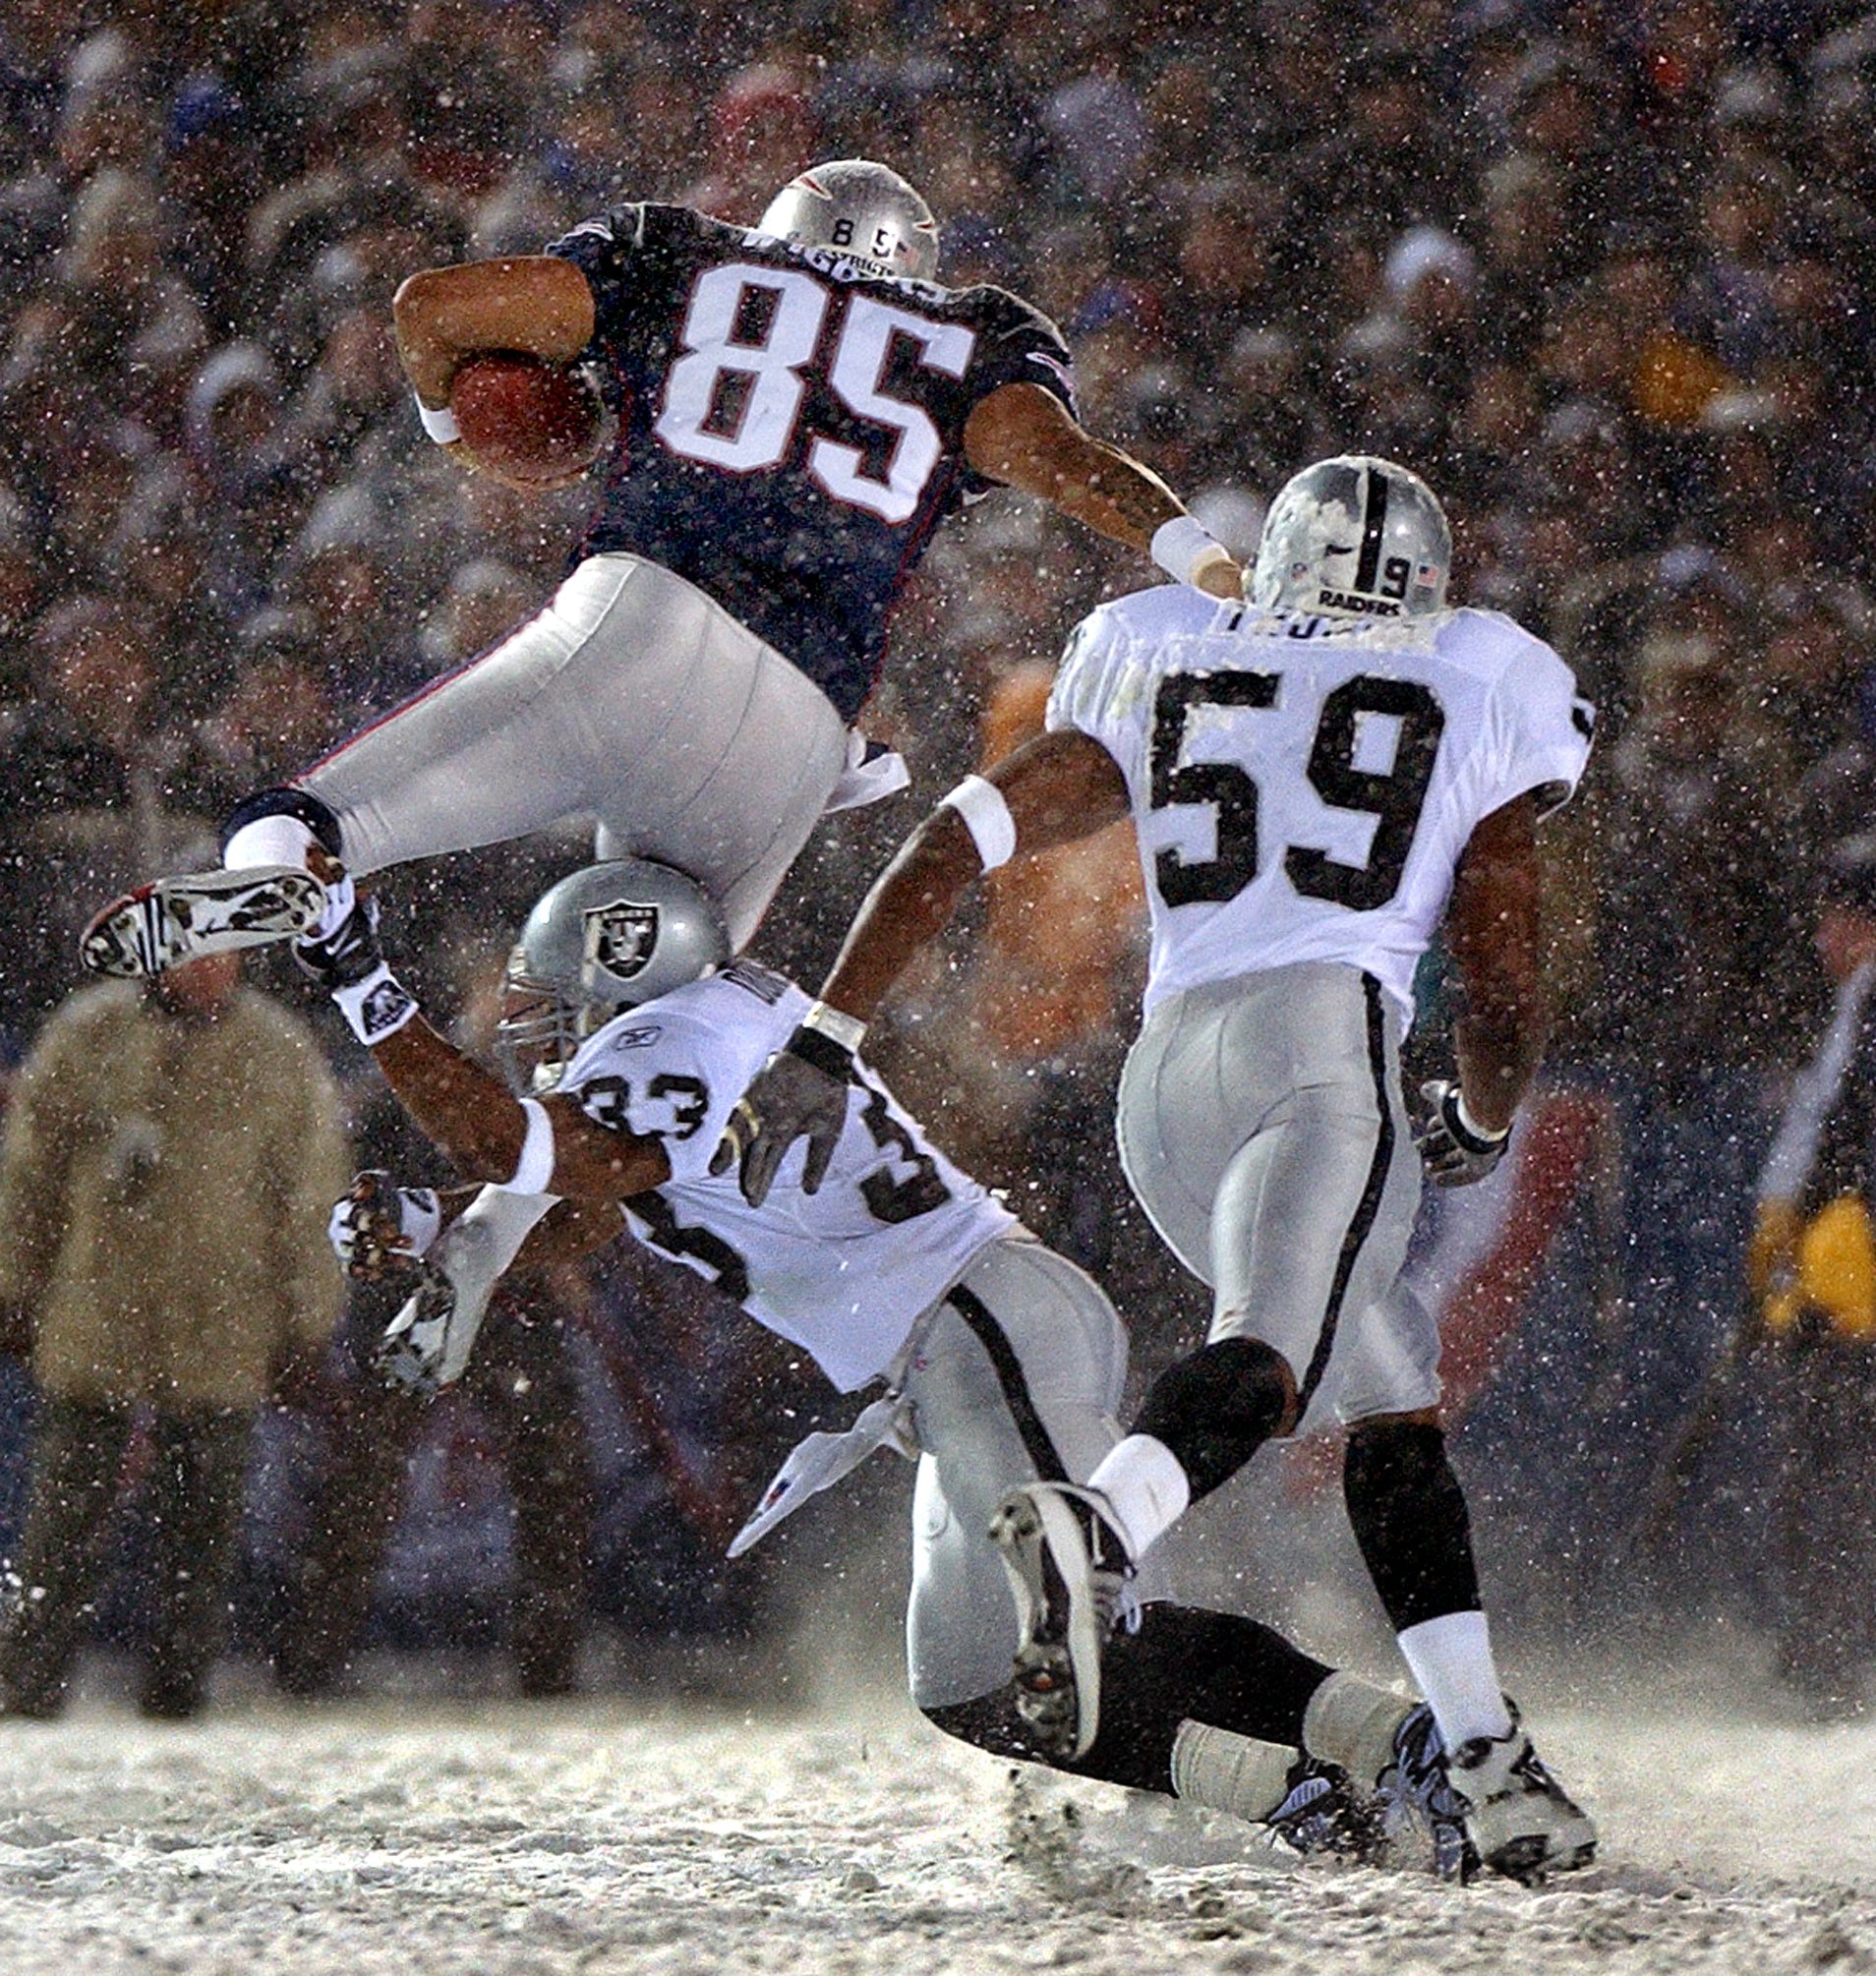 Death and distress haunt the 2001 Patriots team that kicked off a